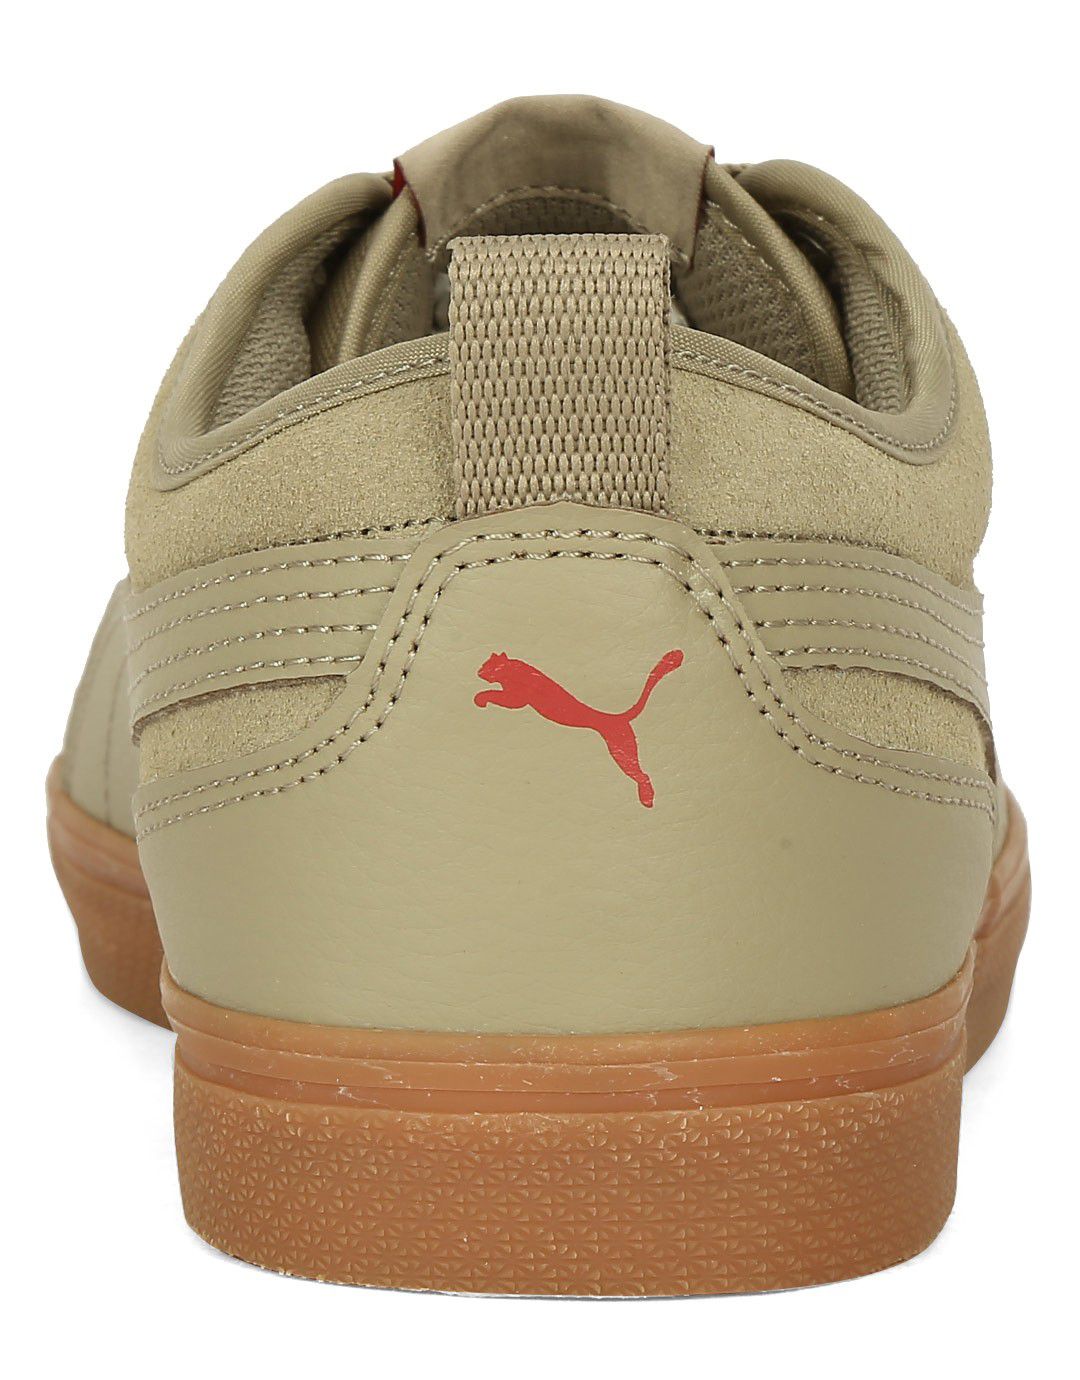 Puma Beige Casual Shoes - Buy Puma Beige Casual Shoes Online at Best ...